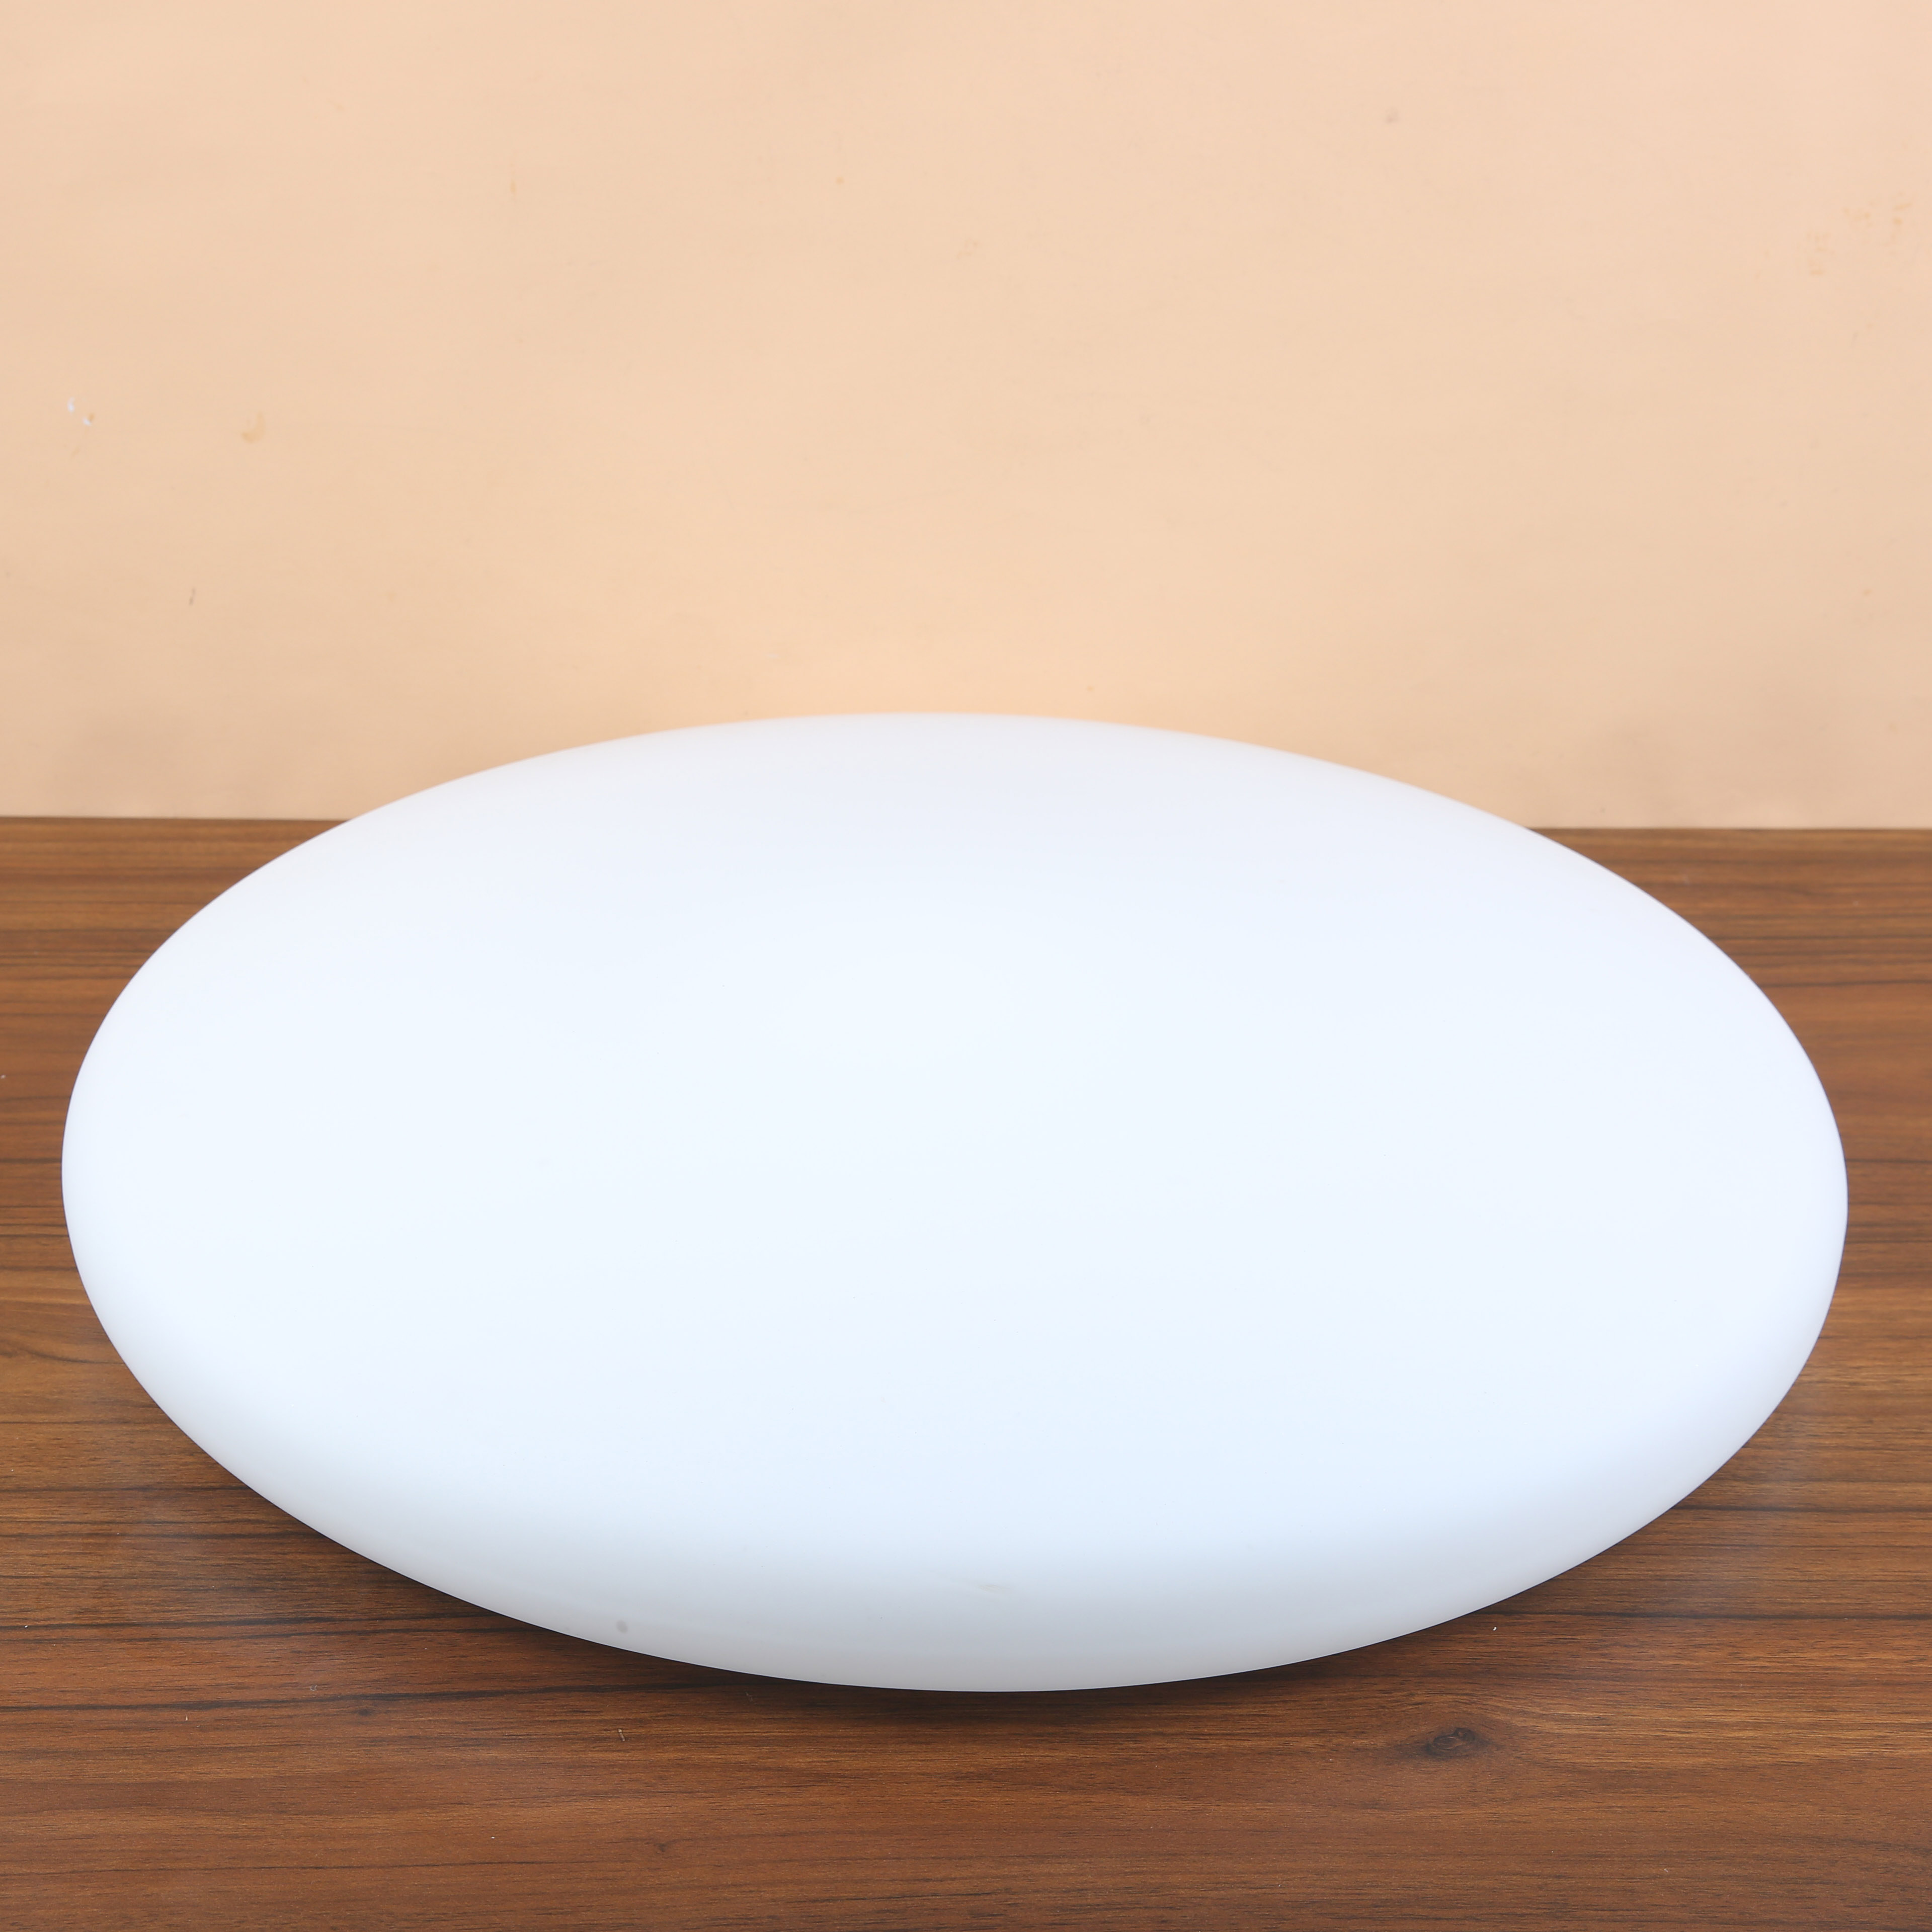 Simple Hotel Frosted White Glass Aja atupa Lighting Shade03